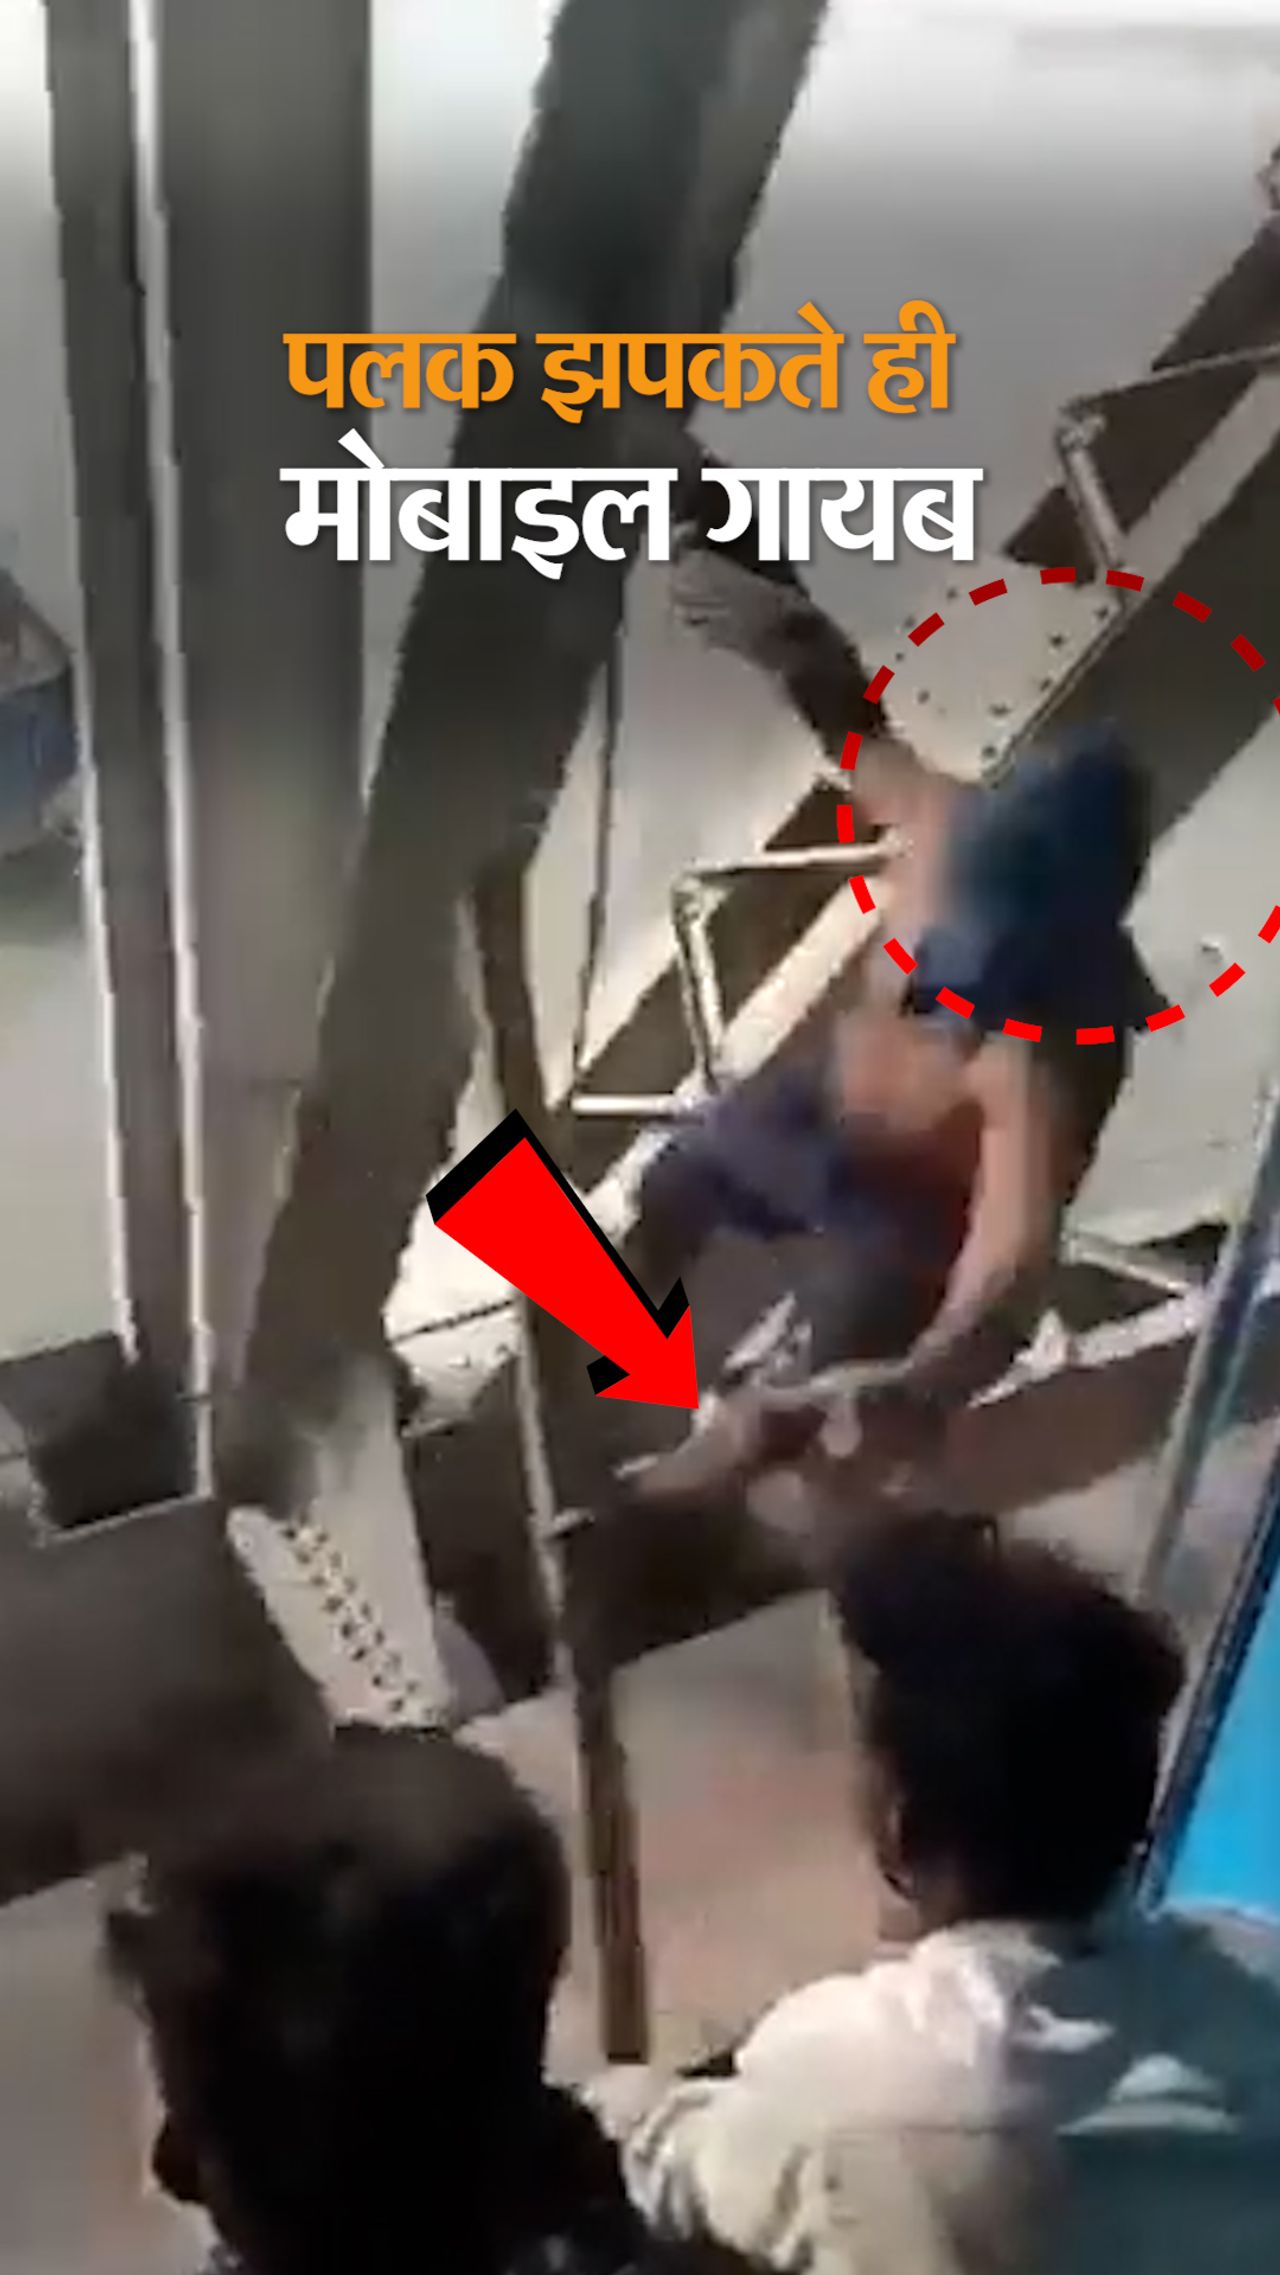 Video of robbery in a moving train in Begusarai surfaced in half a second